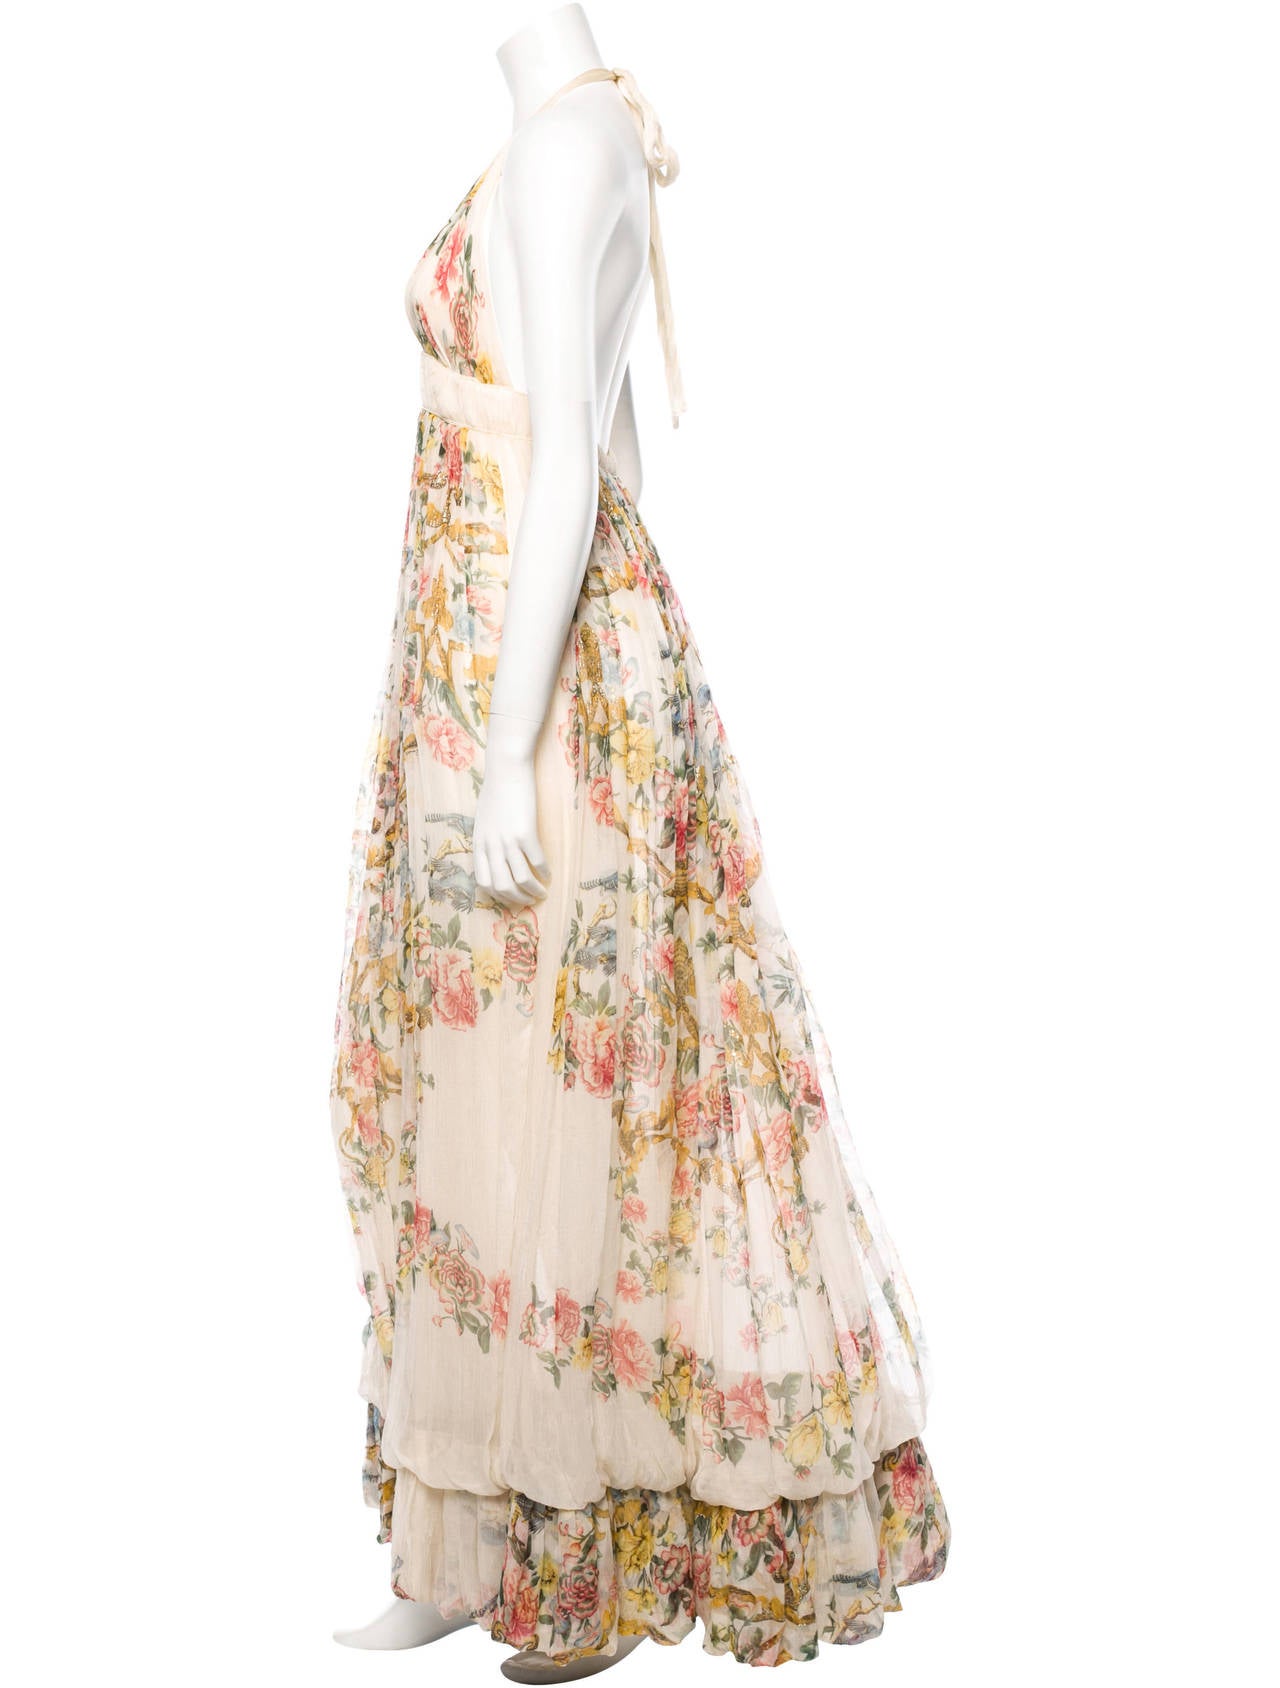 Roberto Cavalli elegantly draped ivory silk gown with floral print throughout, metallic accents, two-layer skirt, halter tie, and invisible back zip closure.

Measurements: Bust 28”, Waist 28”, Length 60”